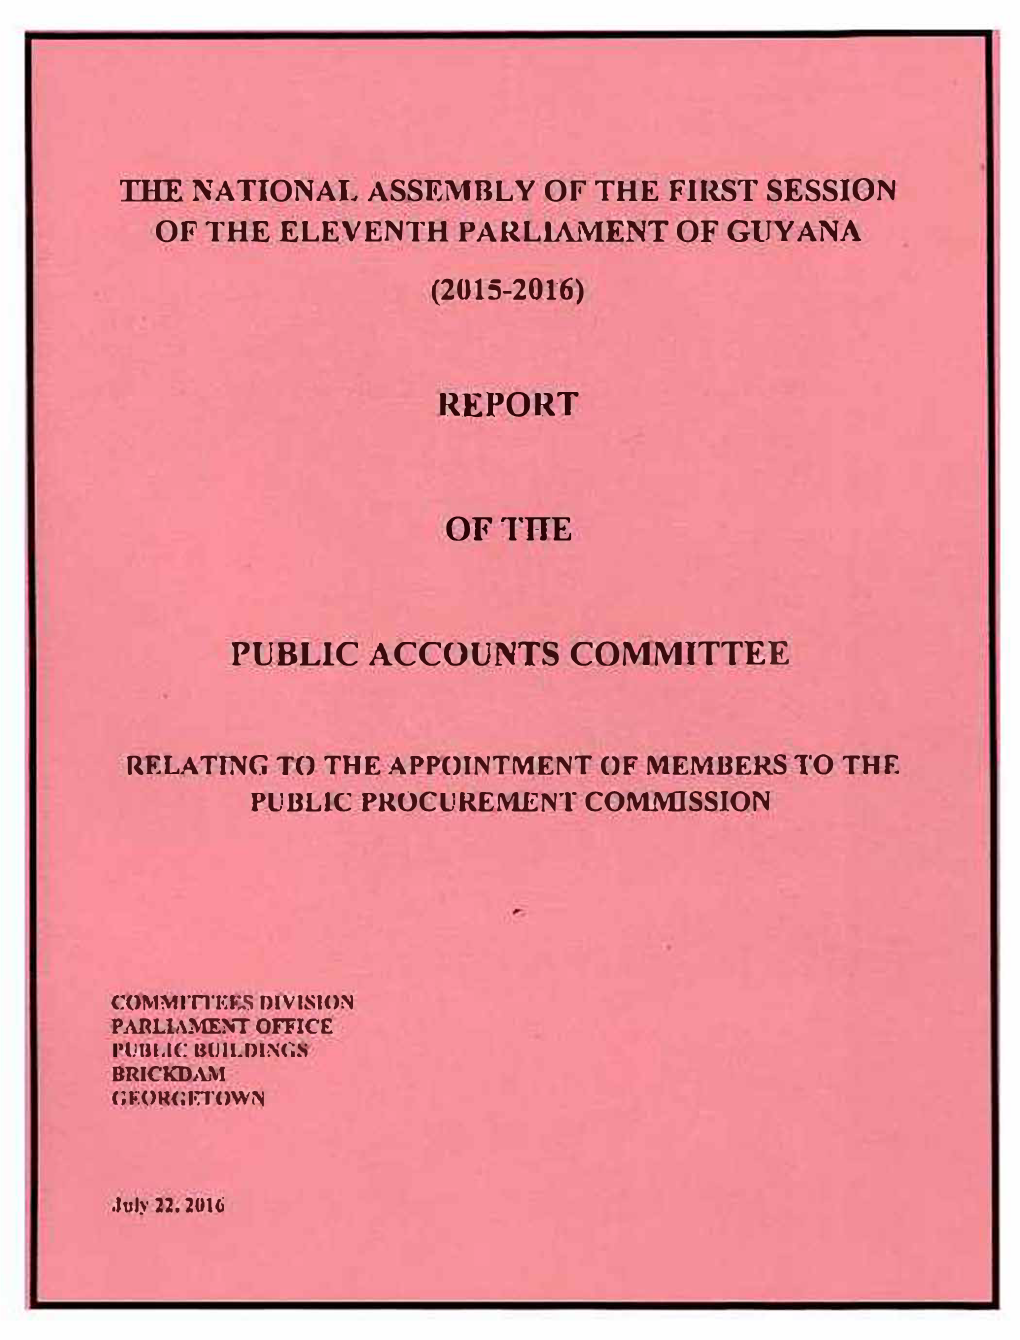 Report of the Public Accounts Committee Relating to the Appointment of Members of the Public Procurement